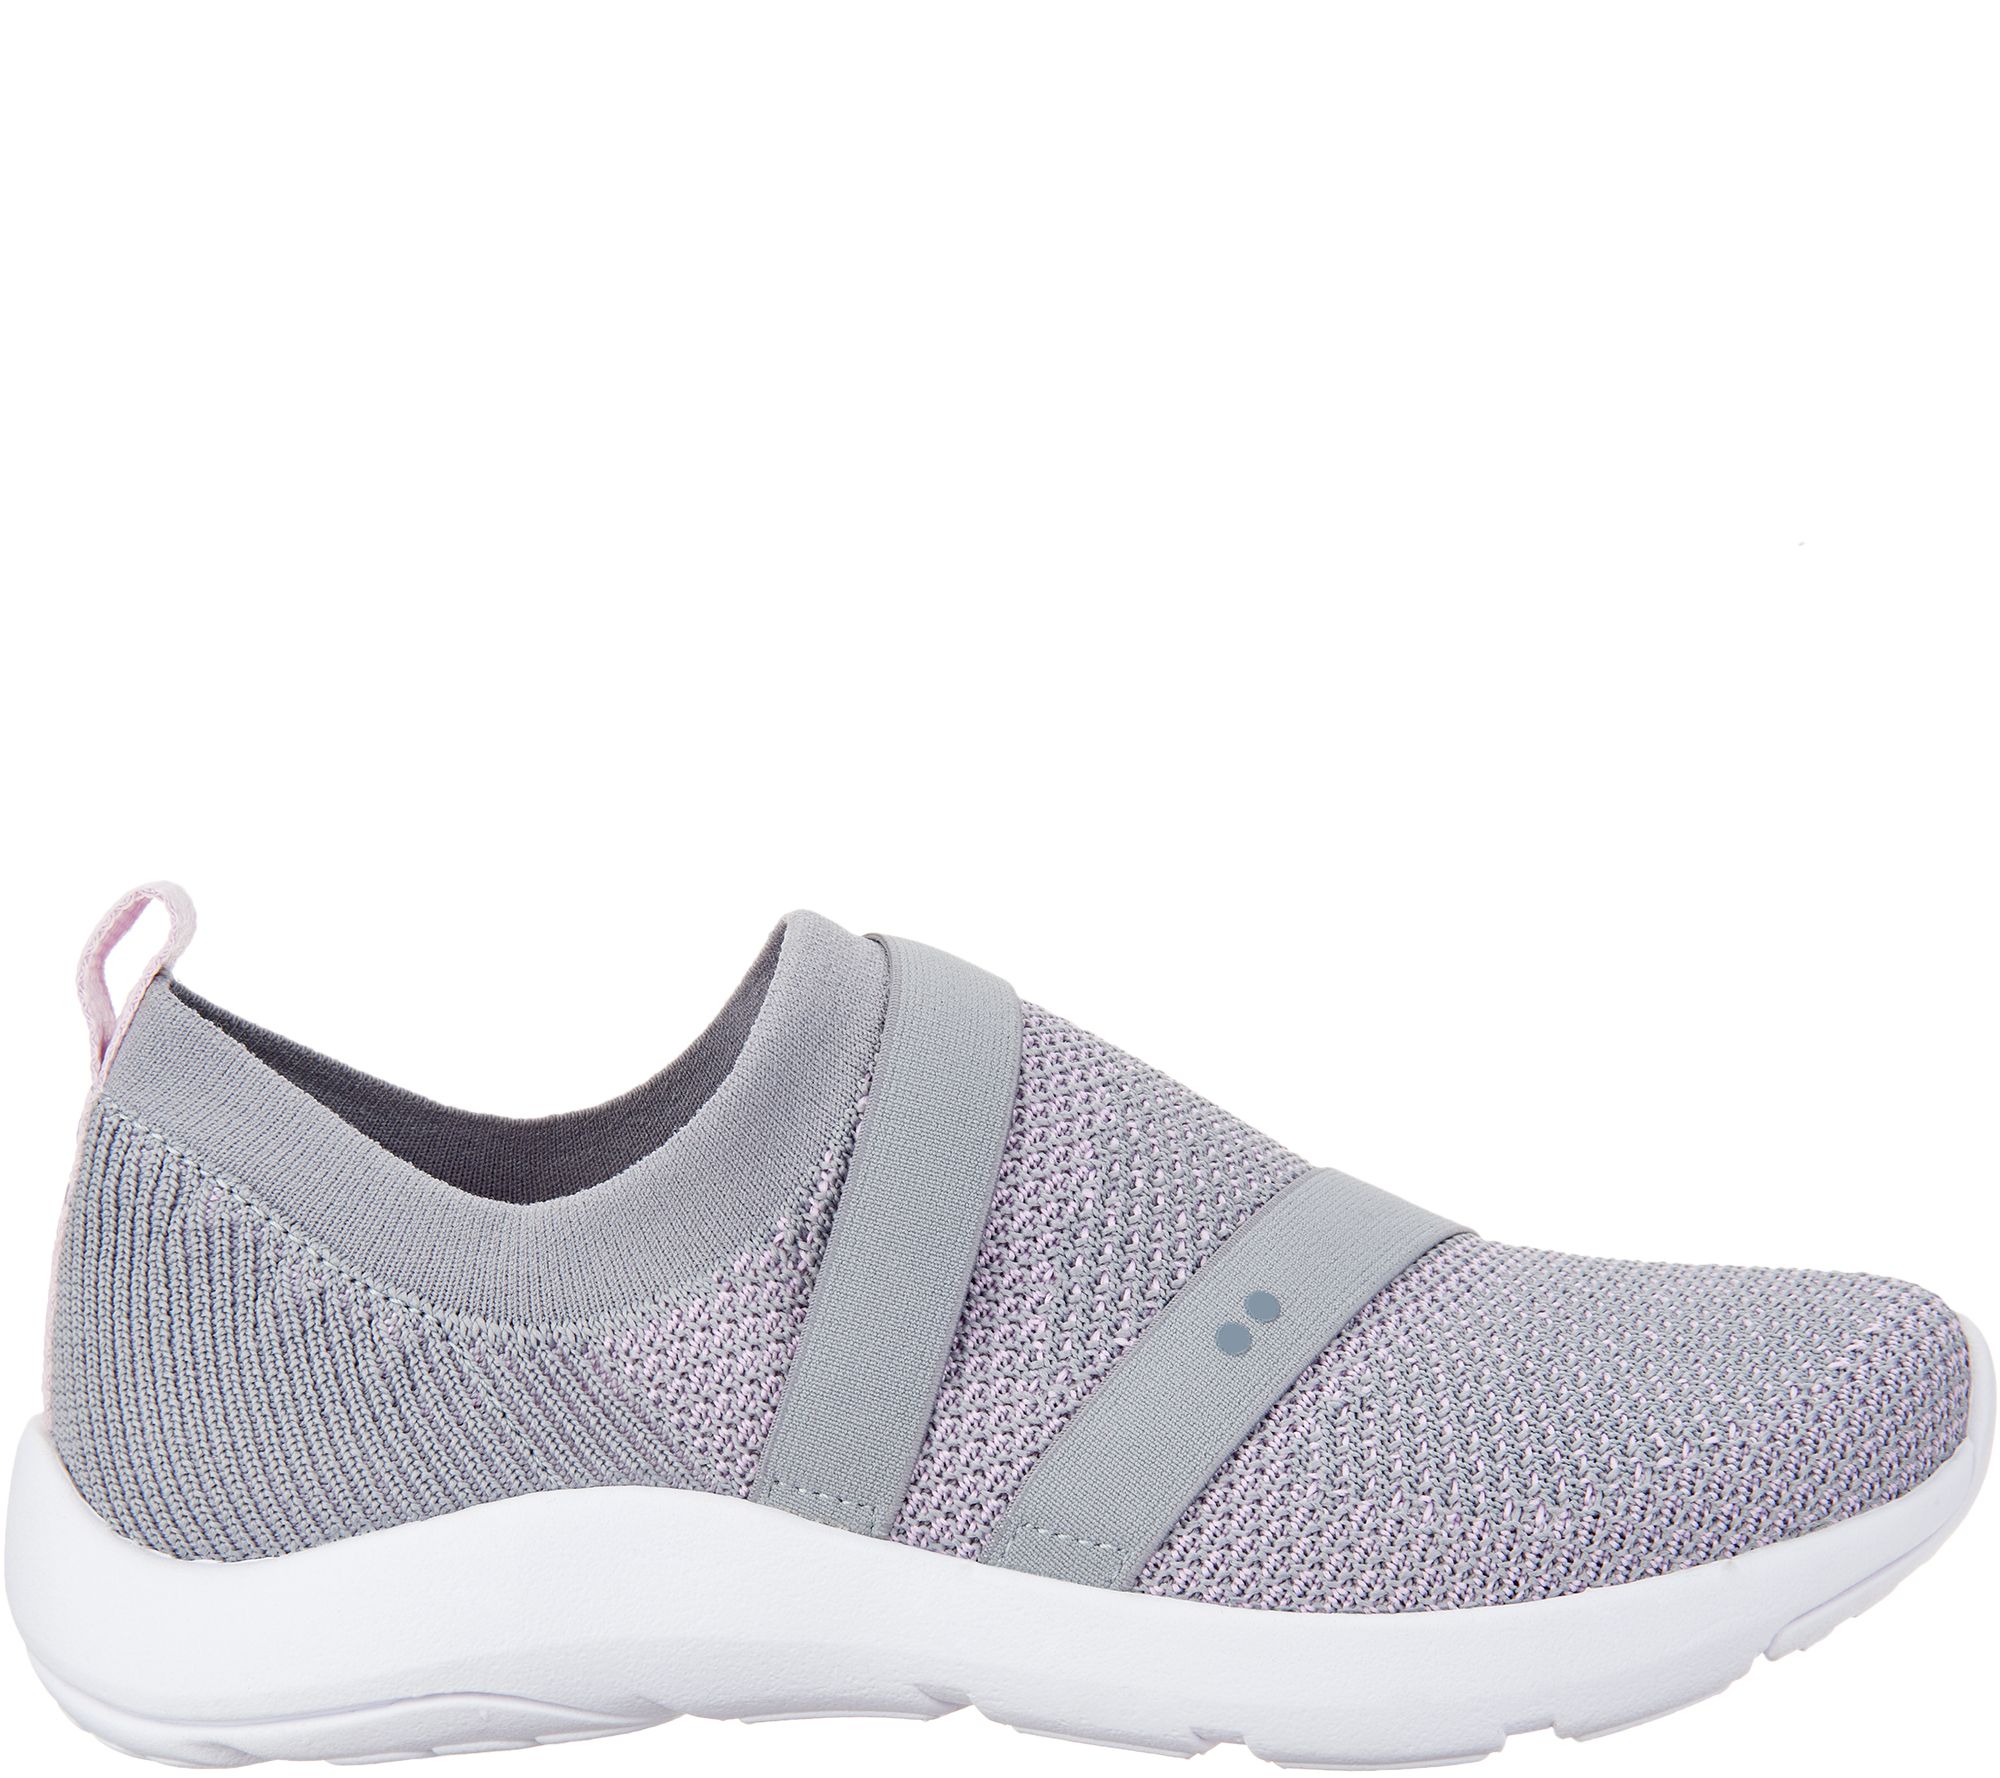 Ryka Stretch Knit Slip-On Shoes - Ethereal - QVC.com